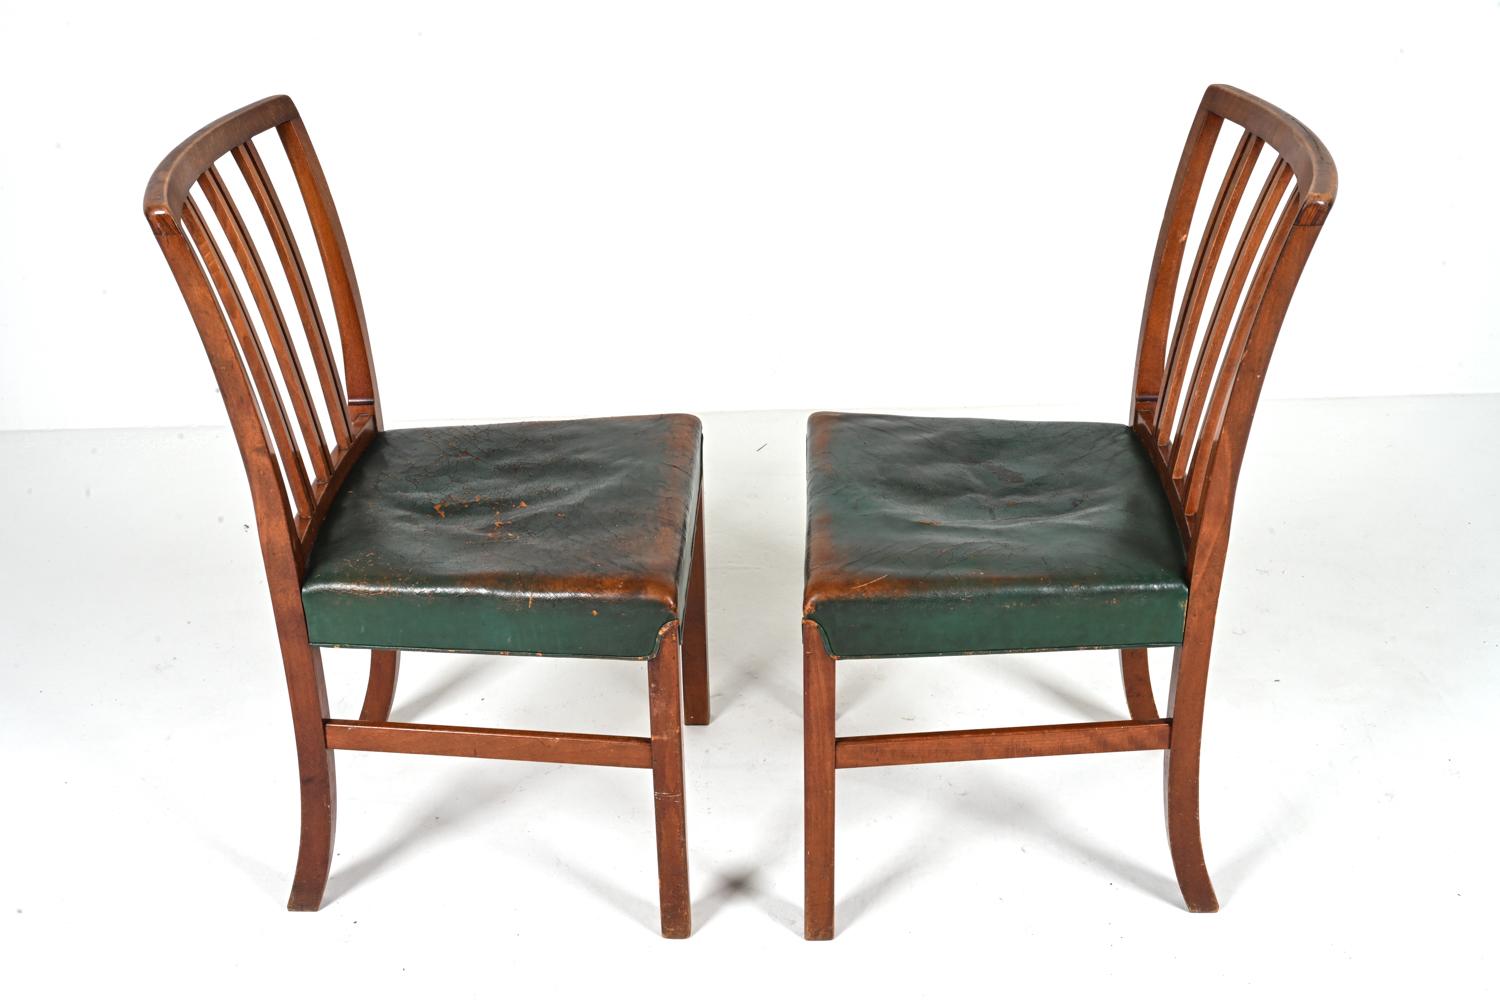 '12' Rare Model 1675B Dining Chairs by Ole Wanscher Fritz Hansen, c. 1940's For Sale 11